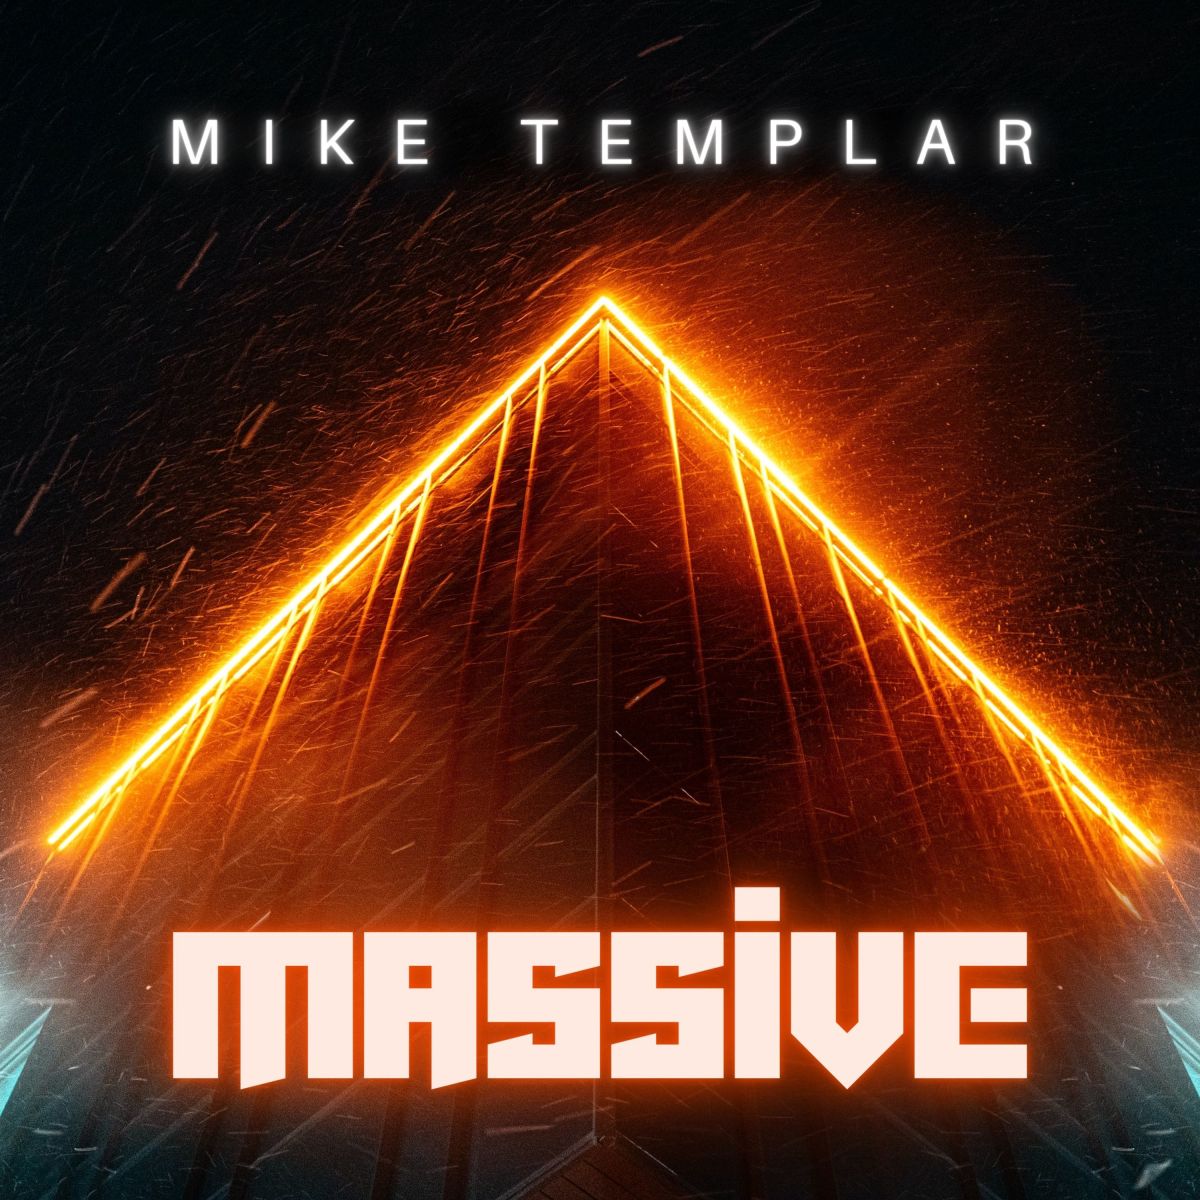 synth-album-review-massive-by-mike-templar-and-guests